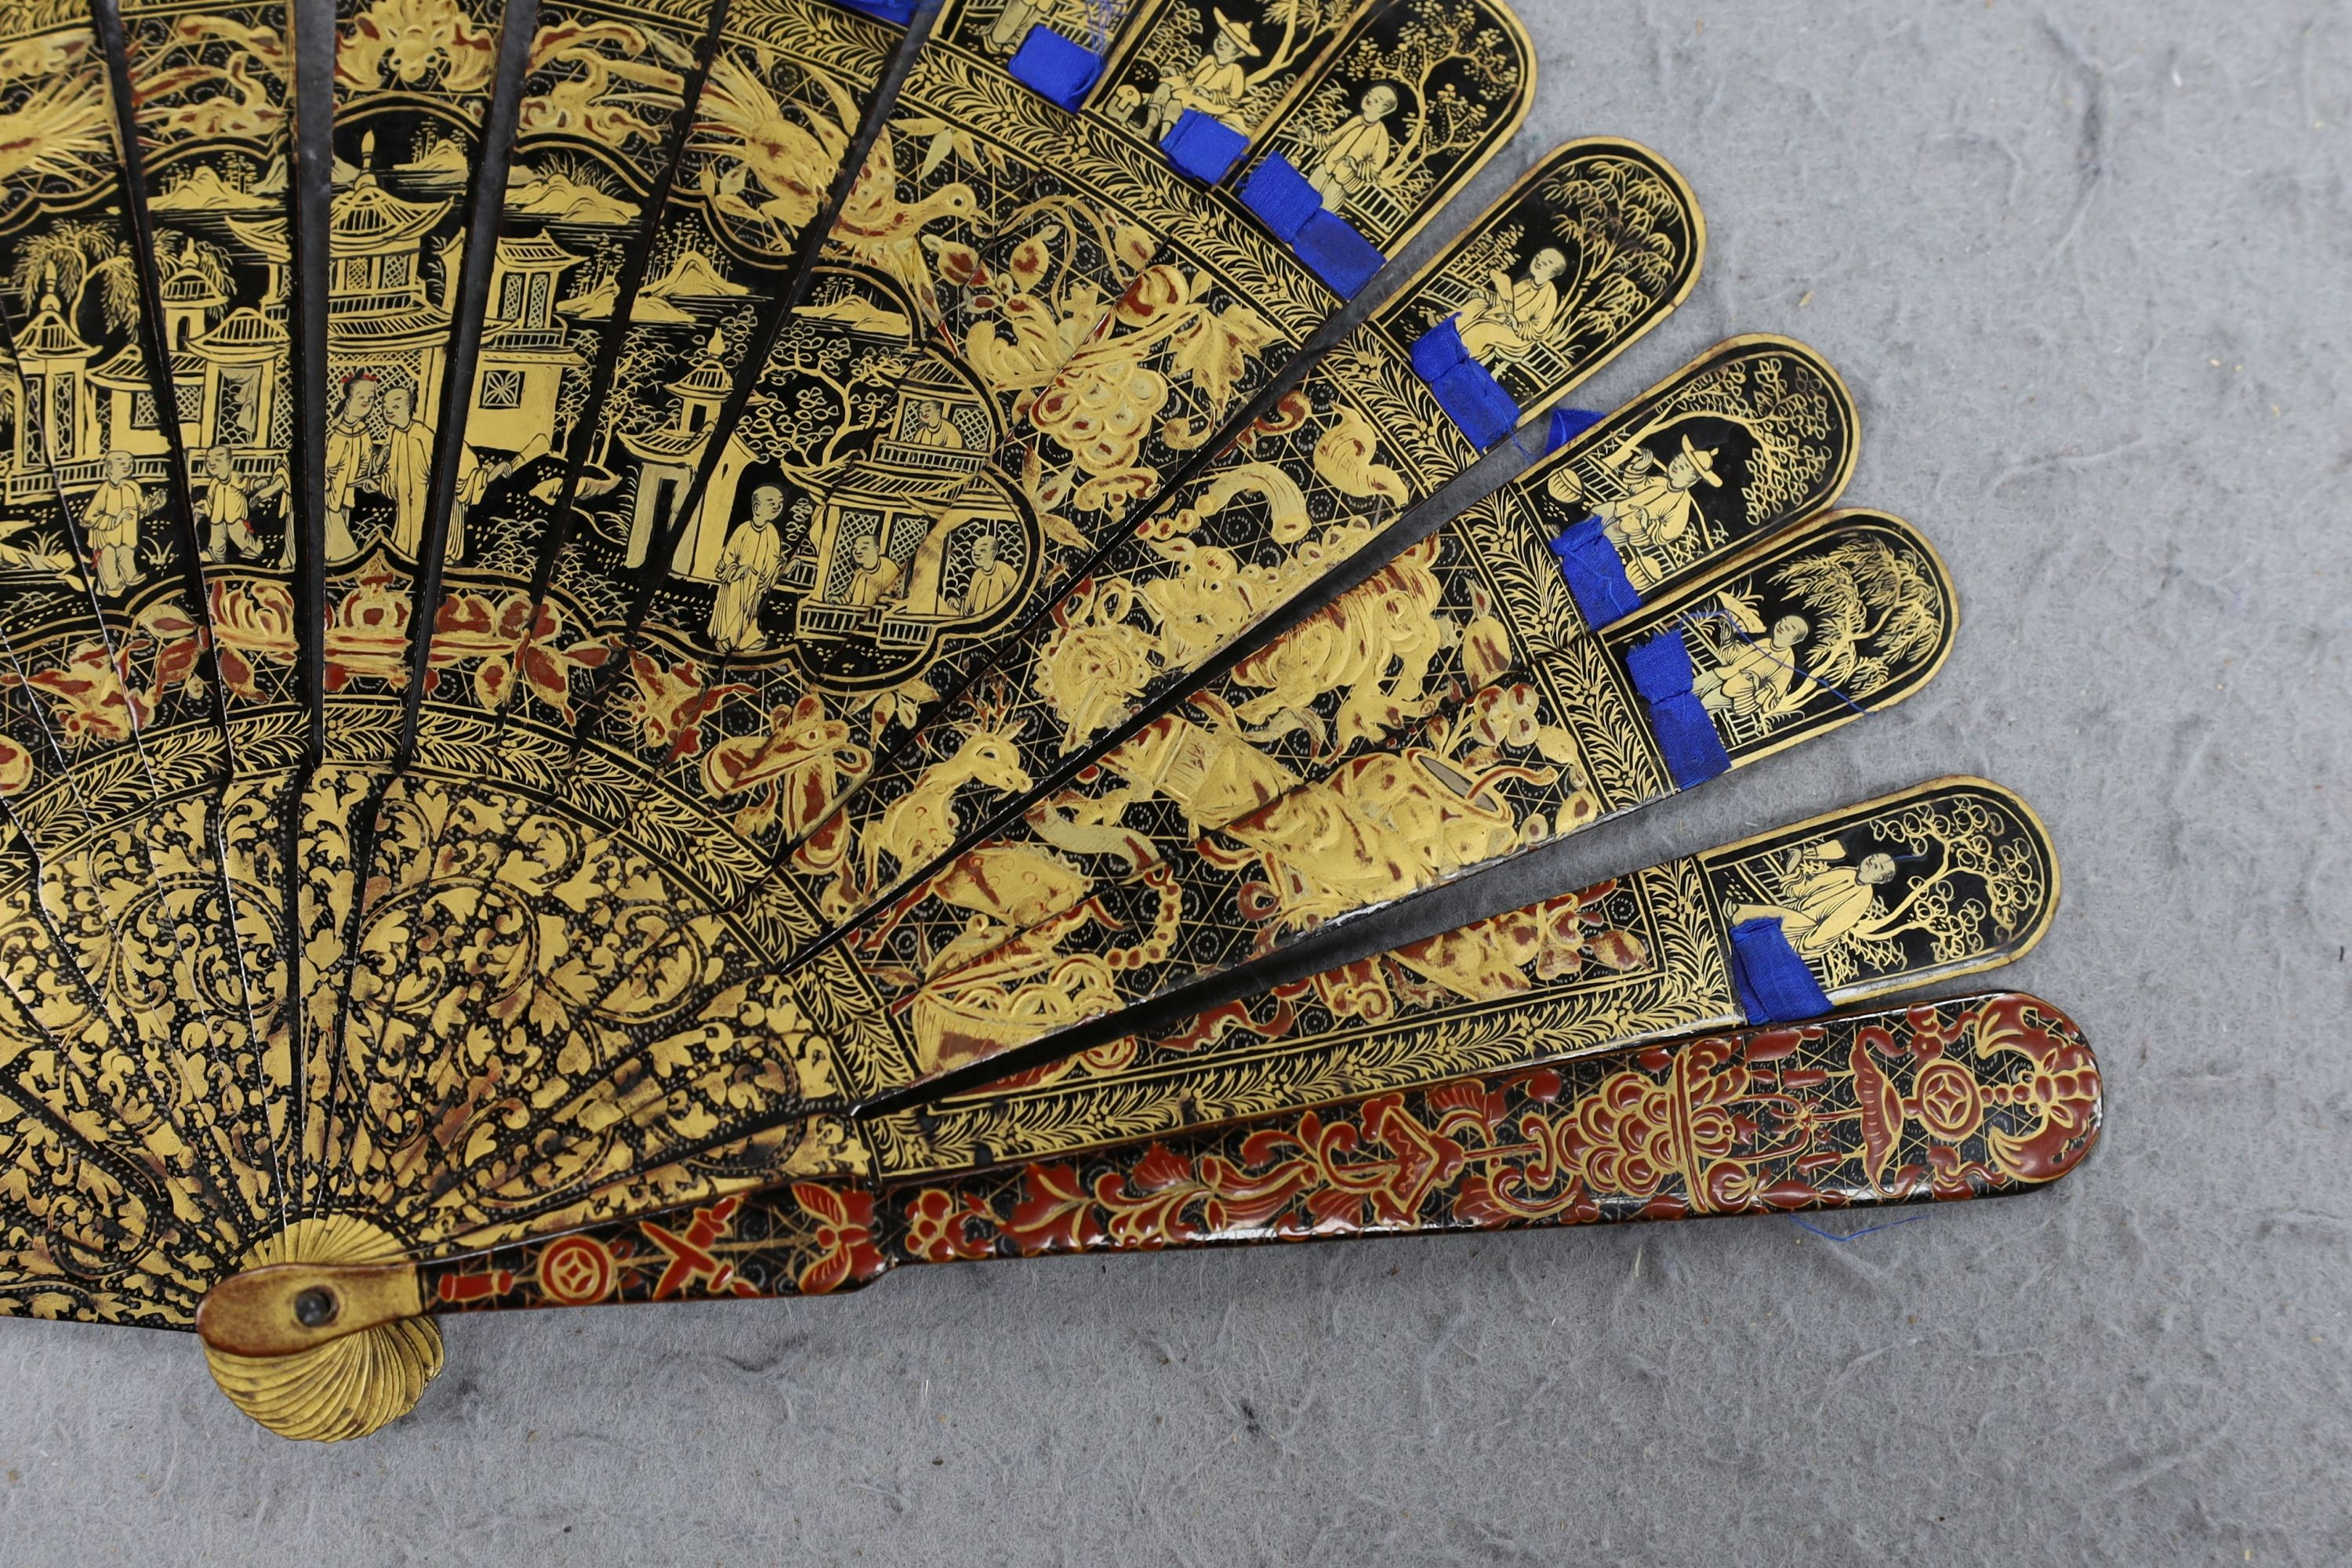 A Chinese gilt-decorated lacquer fan in a brocade covered case, 19th century